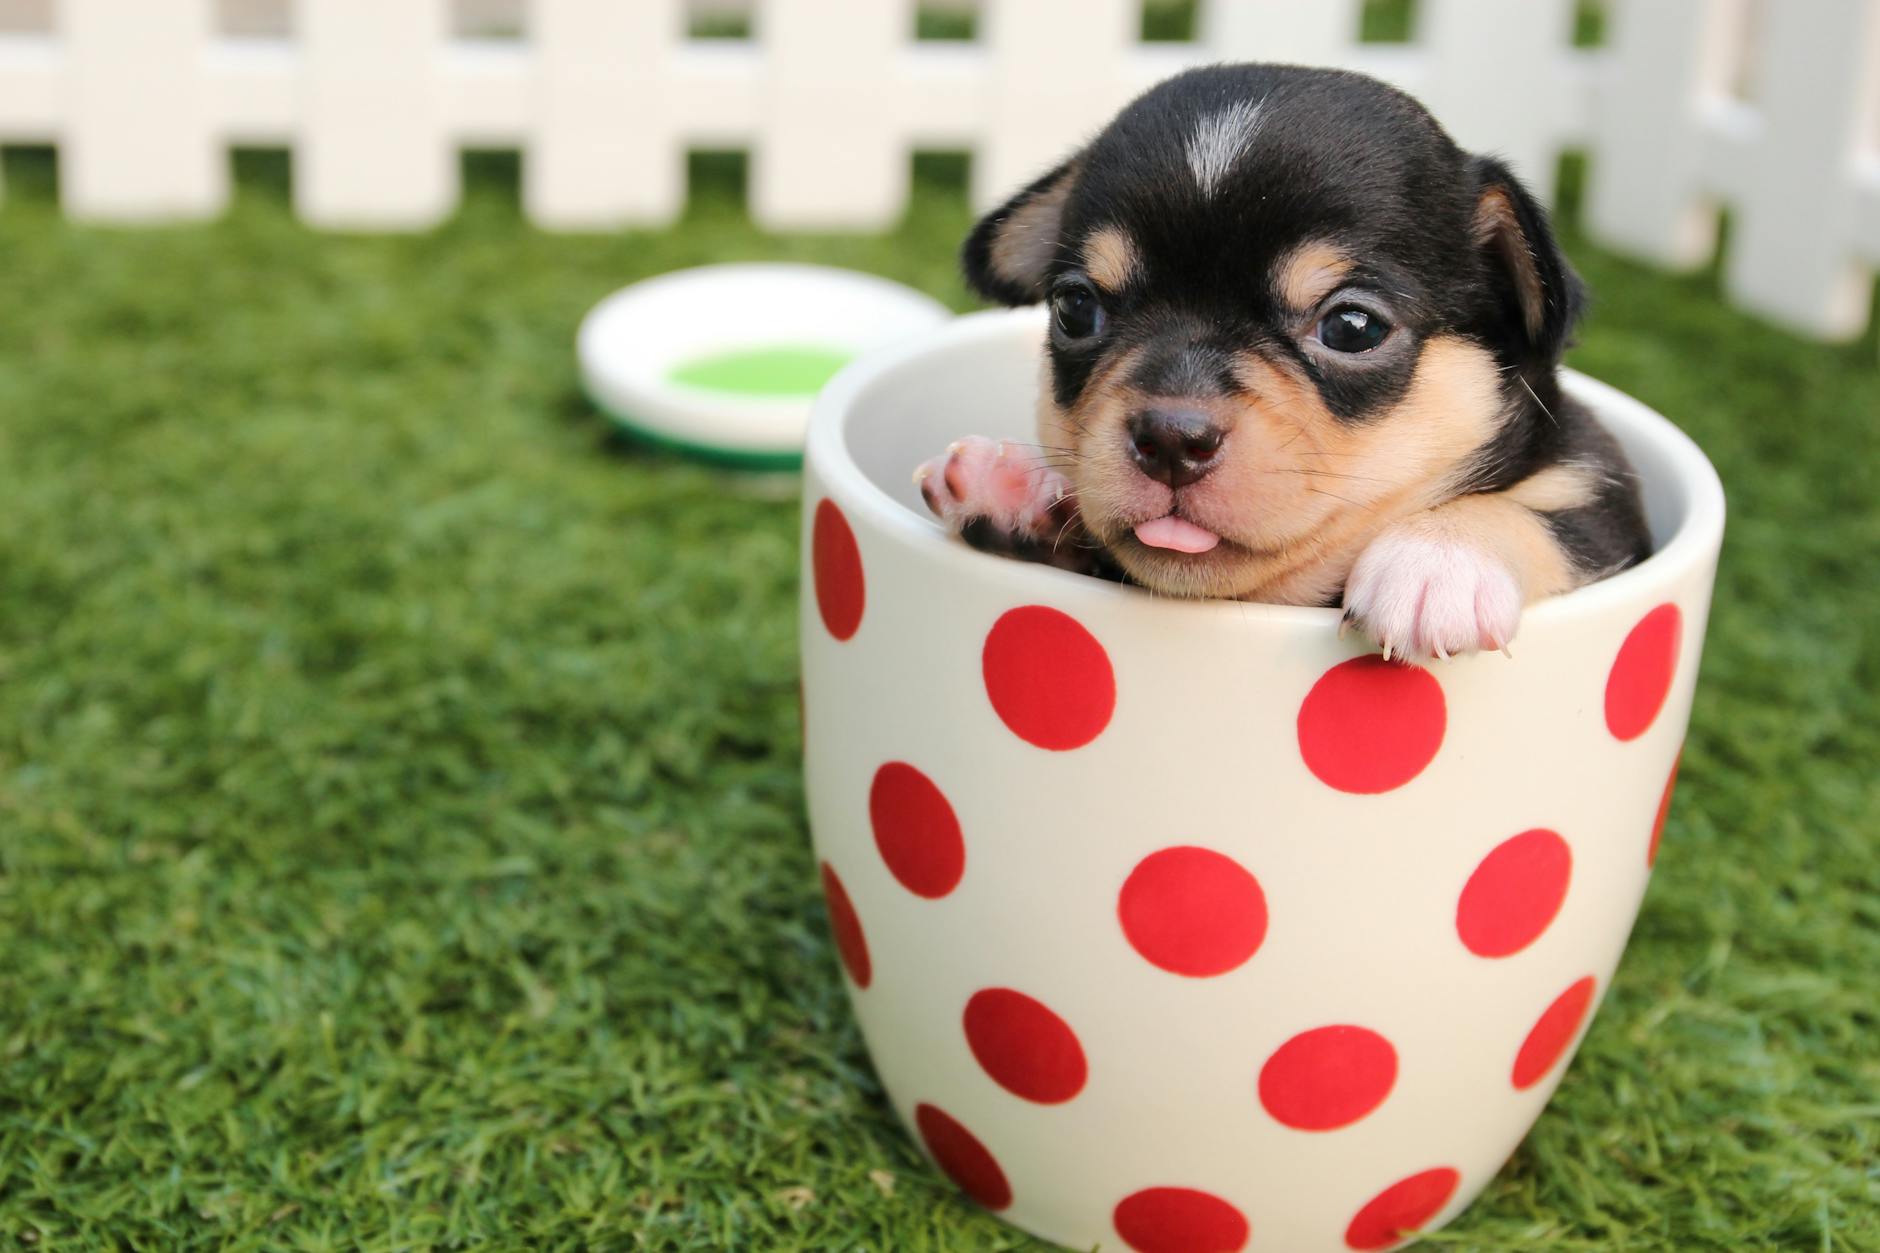 Black and brown puppy in polka dot mug on green field.